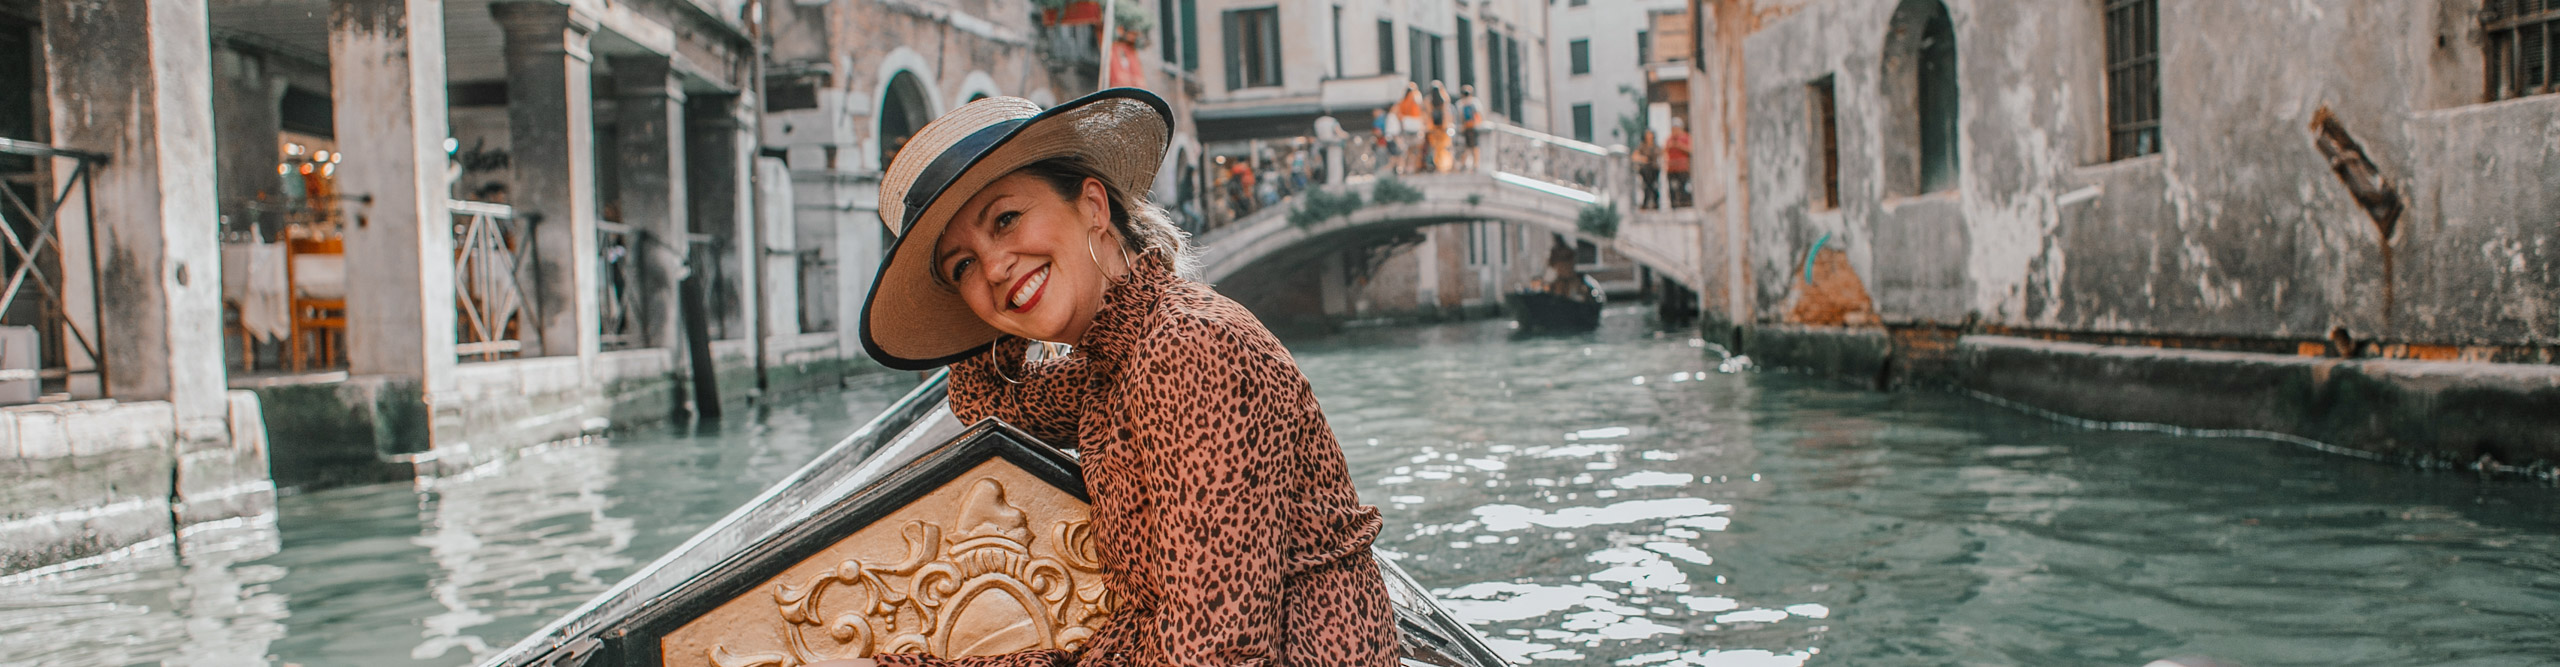 Woman smiling wearing a dress and hat on a gondola in Venice 